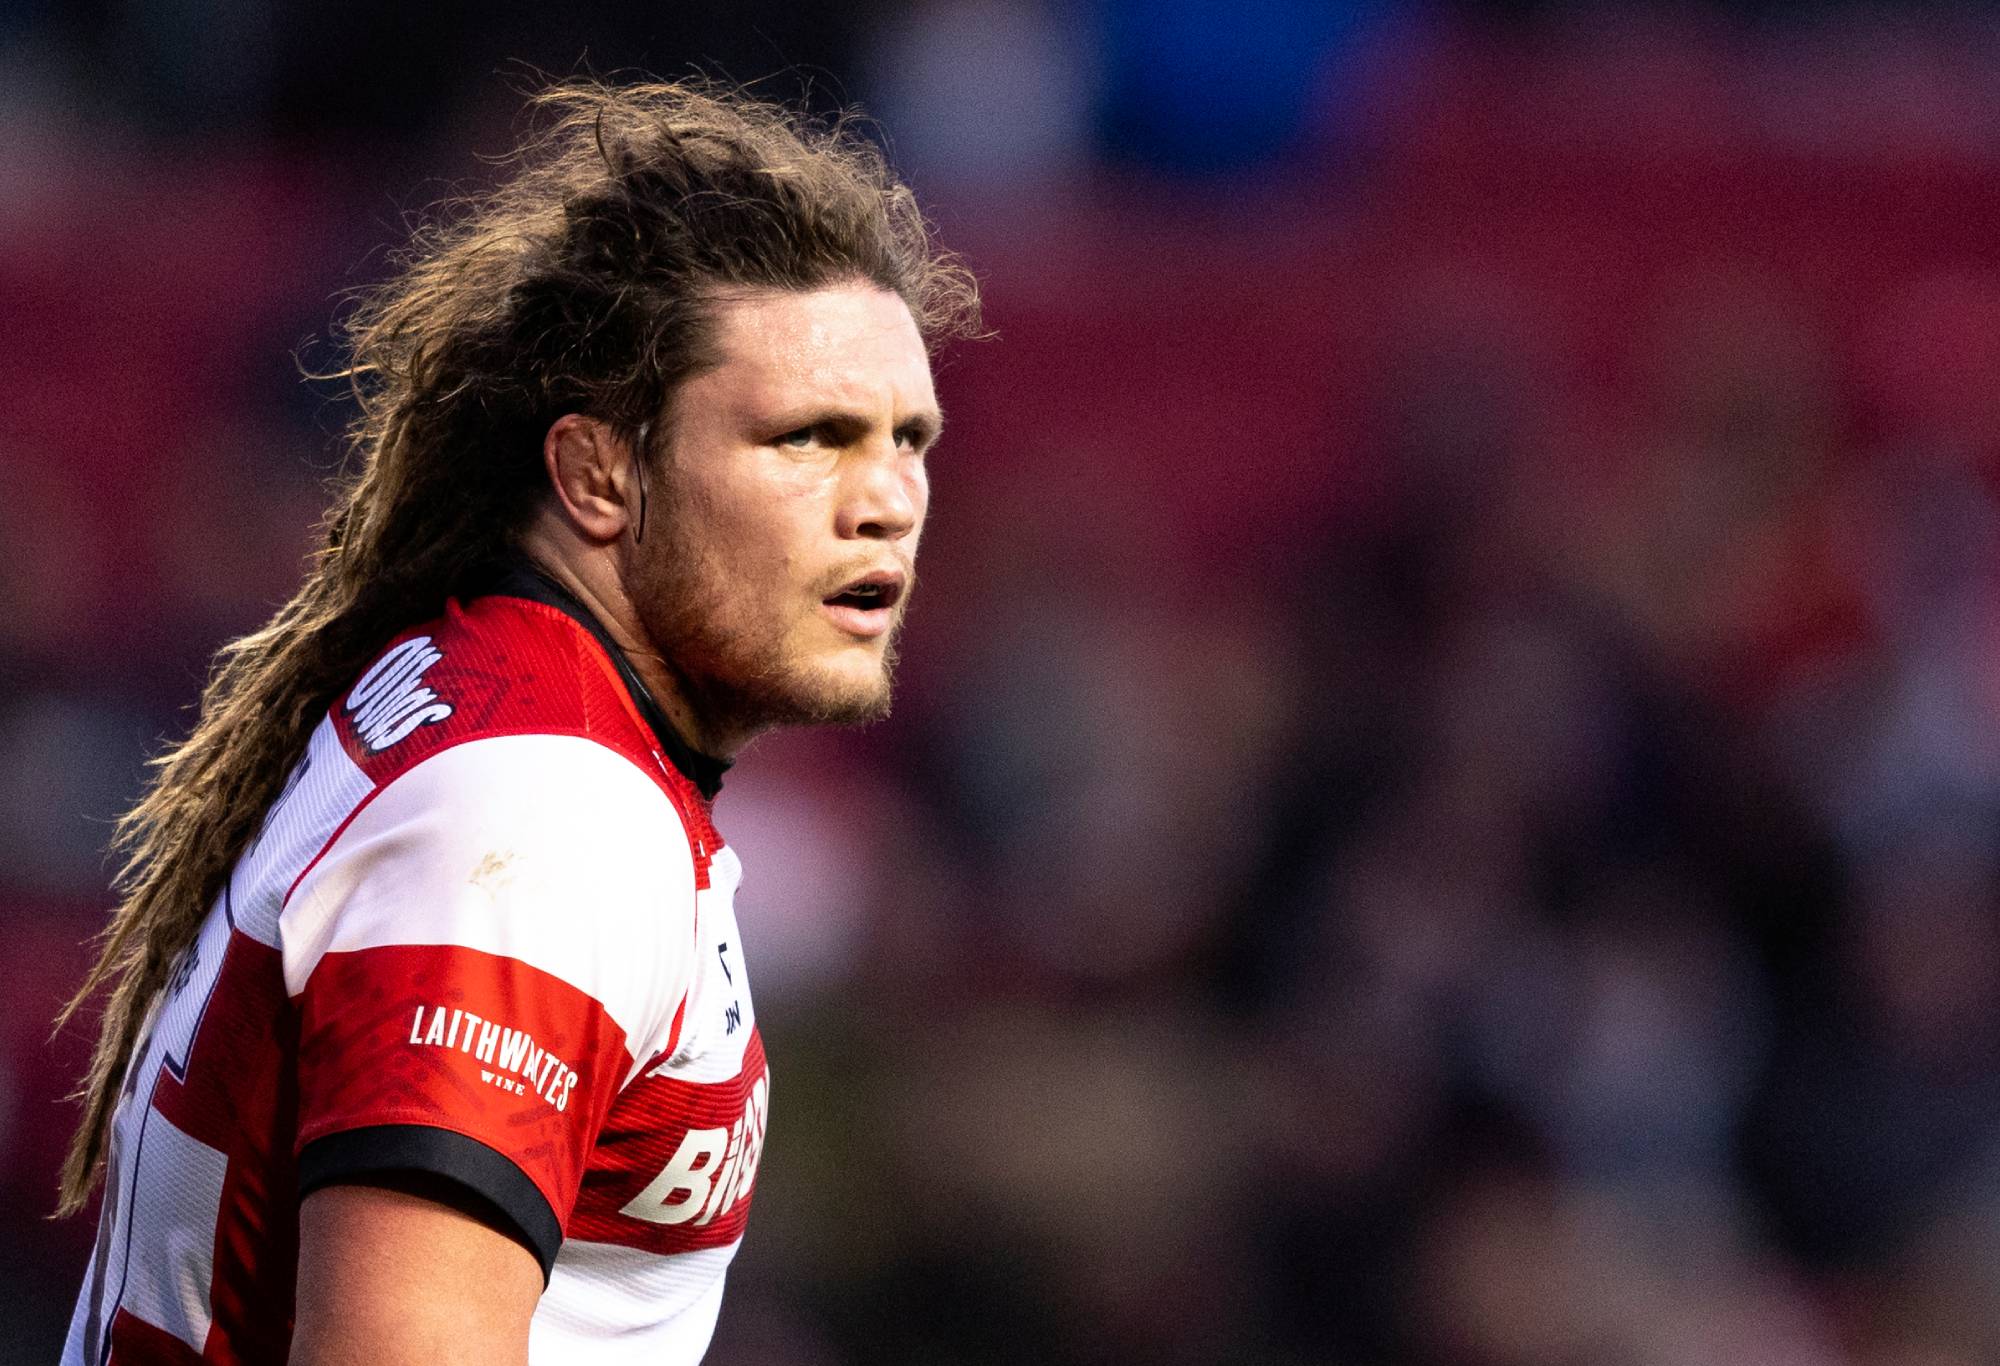 Gloucester's Jordy Reid during the Gallagher Premiership Rugby match between Bristol Bears and Gloucester Rugby at Ashton Gate on April 22, 2022 in Bristol, England. (Photo by Bob Bradford - CameraSport via Getty Images)